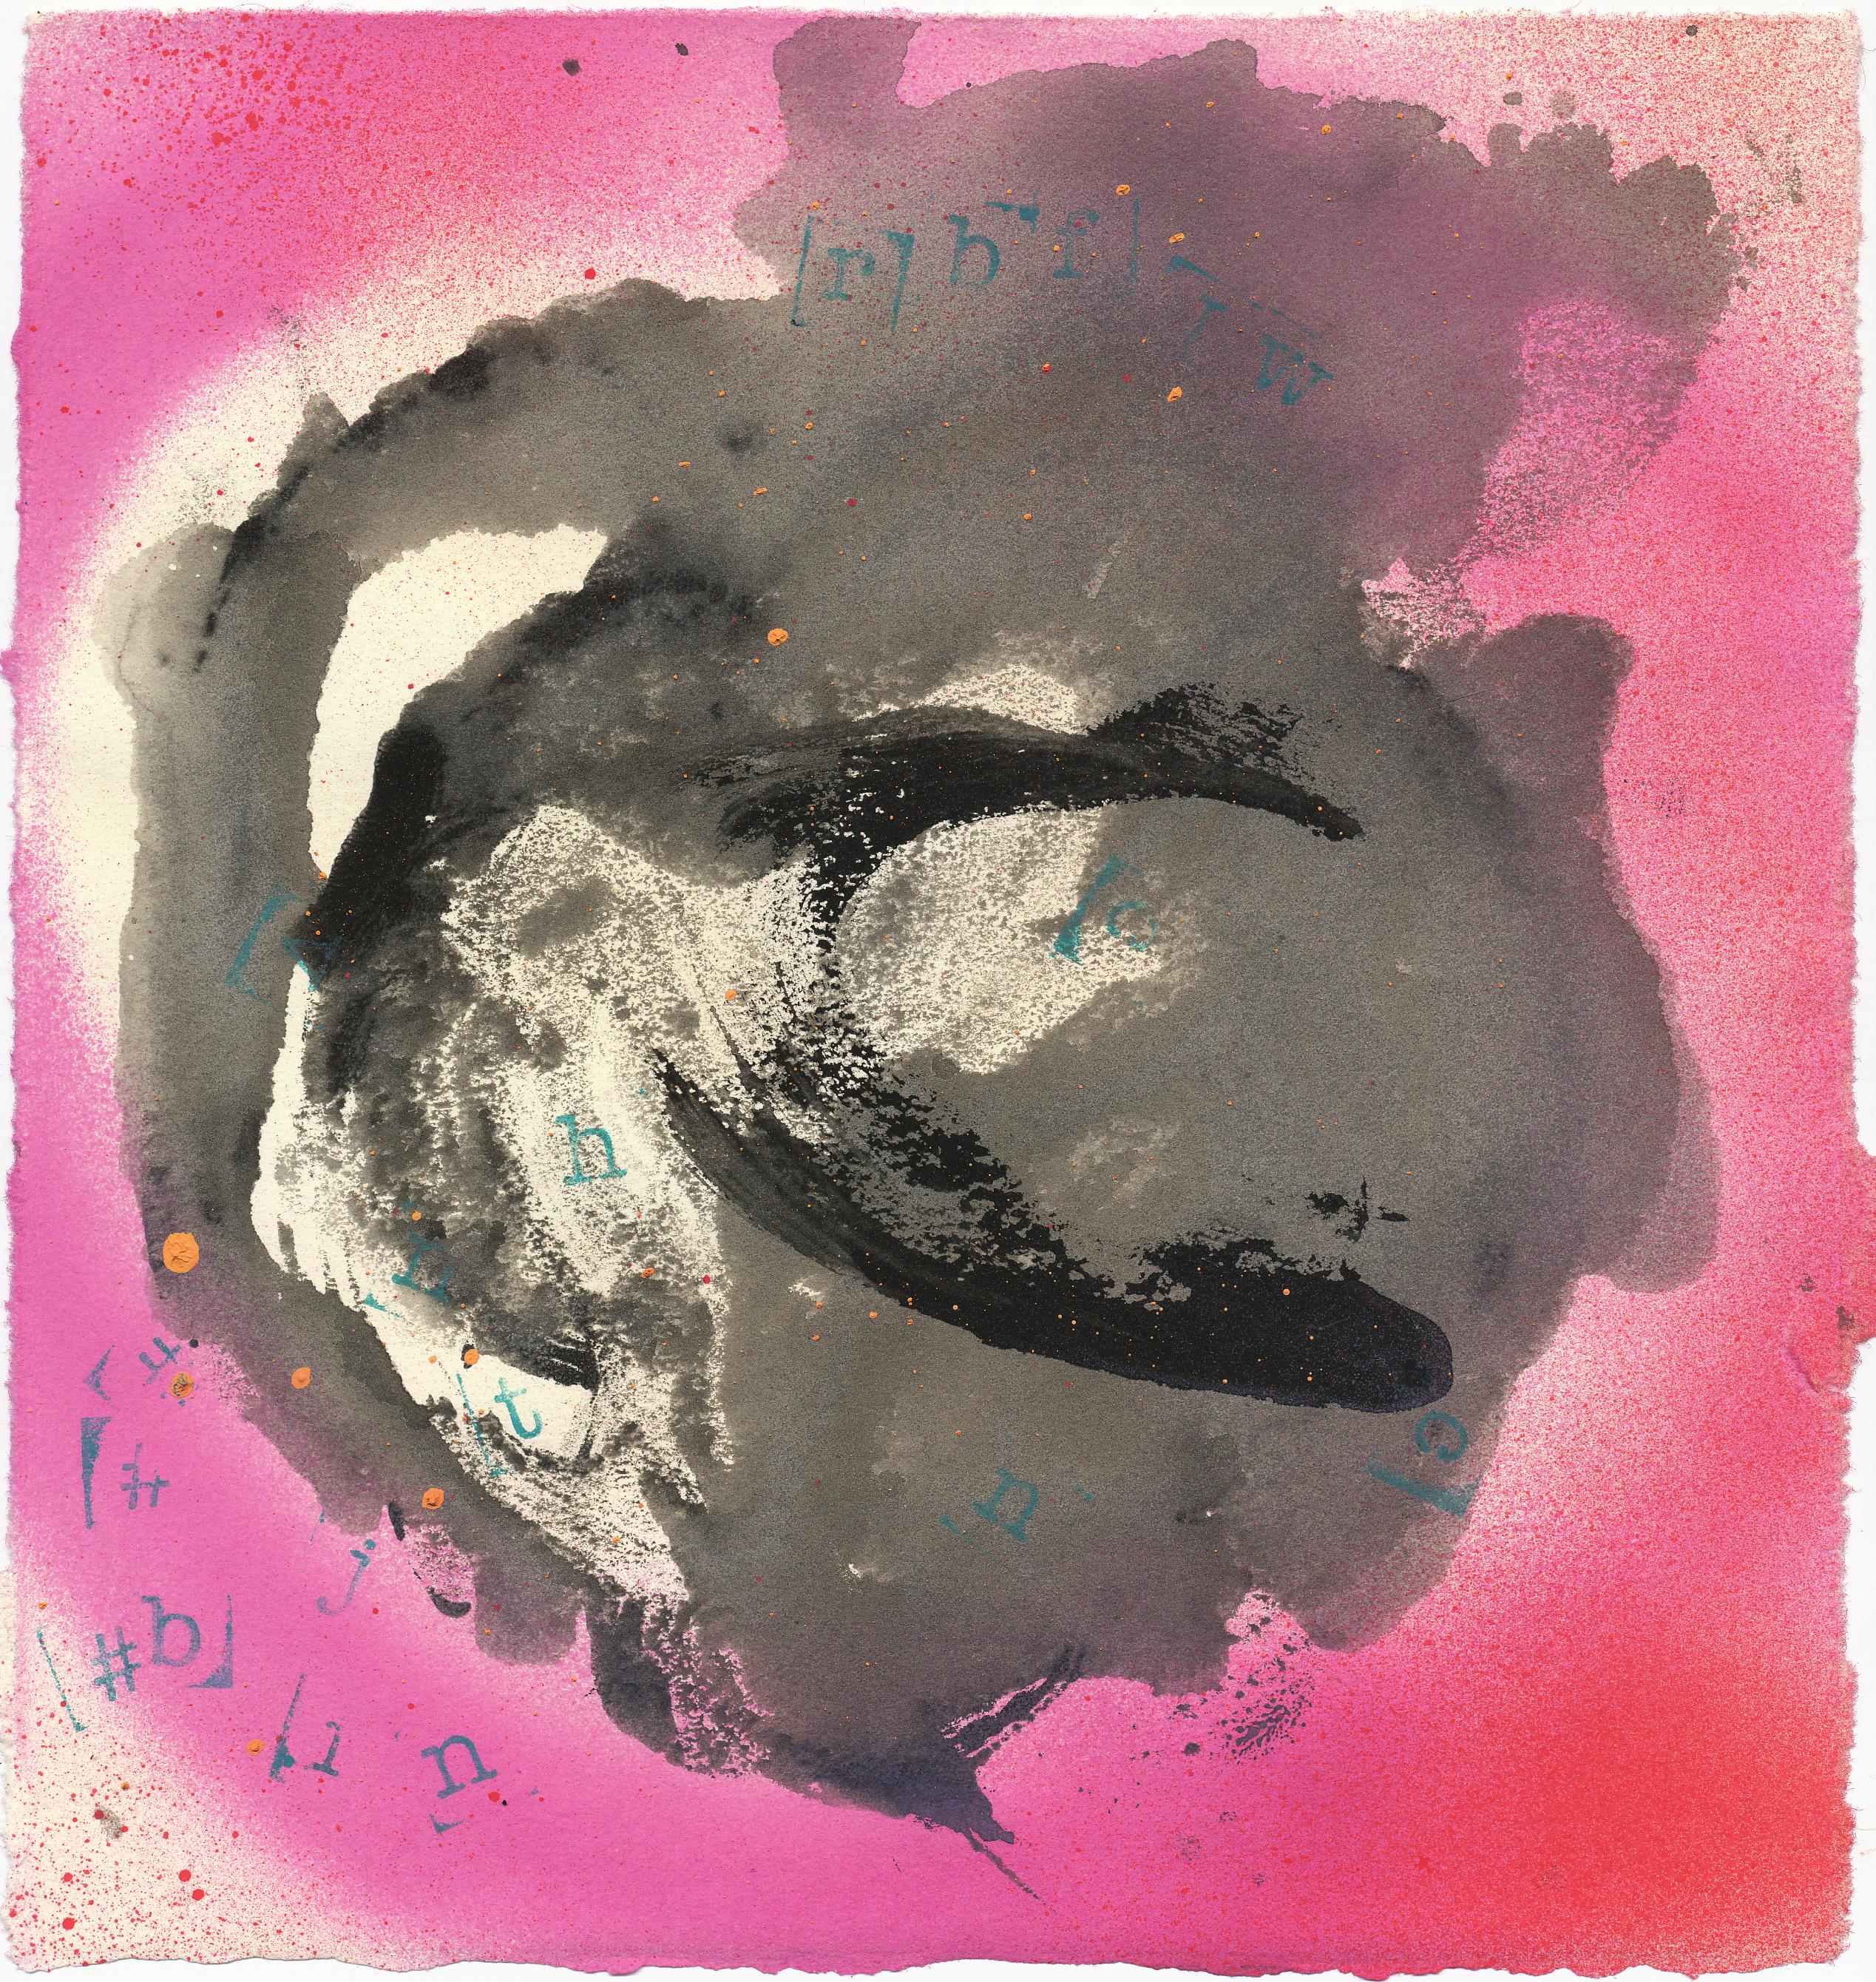 Vivian Liddell Abstract Painting - Love Letter iii - Expressionist Abstract Work on Paper with Pink and Black